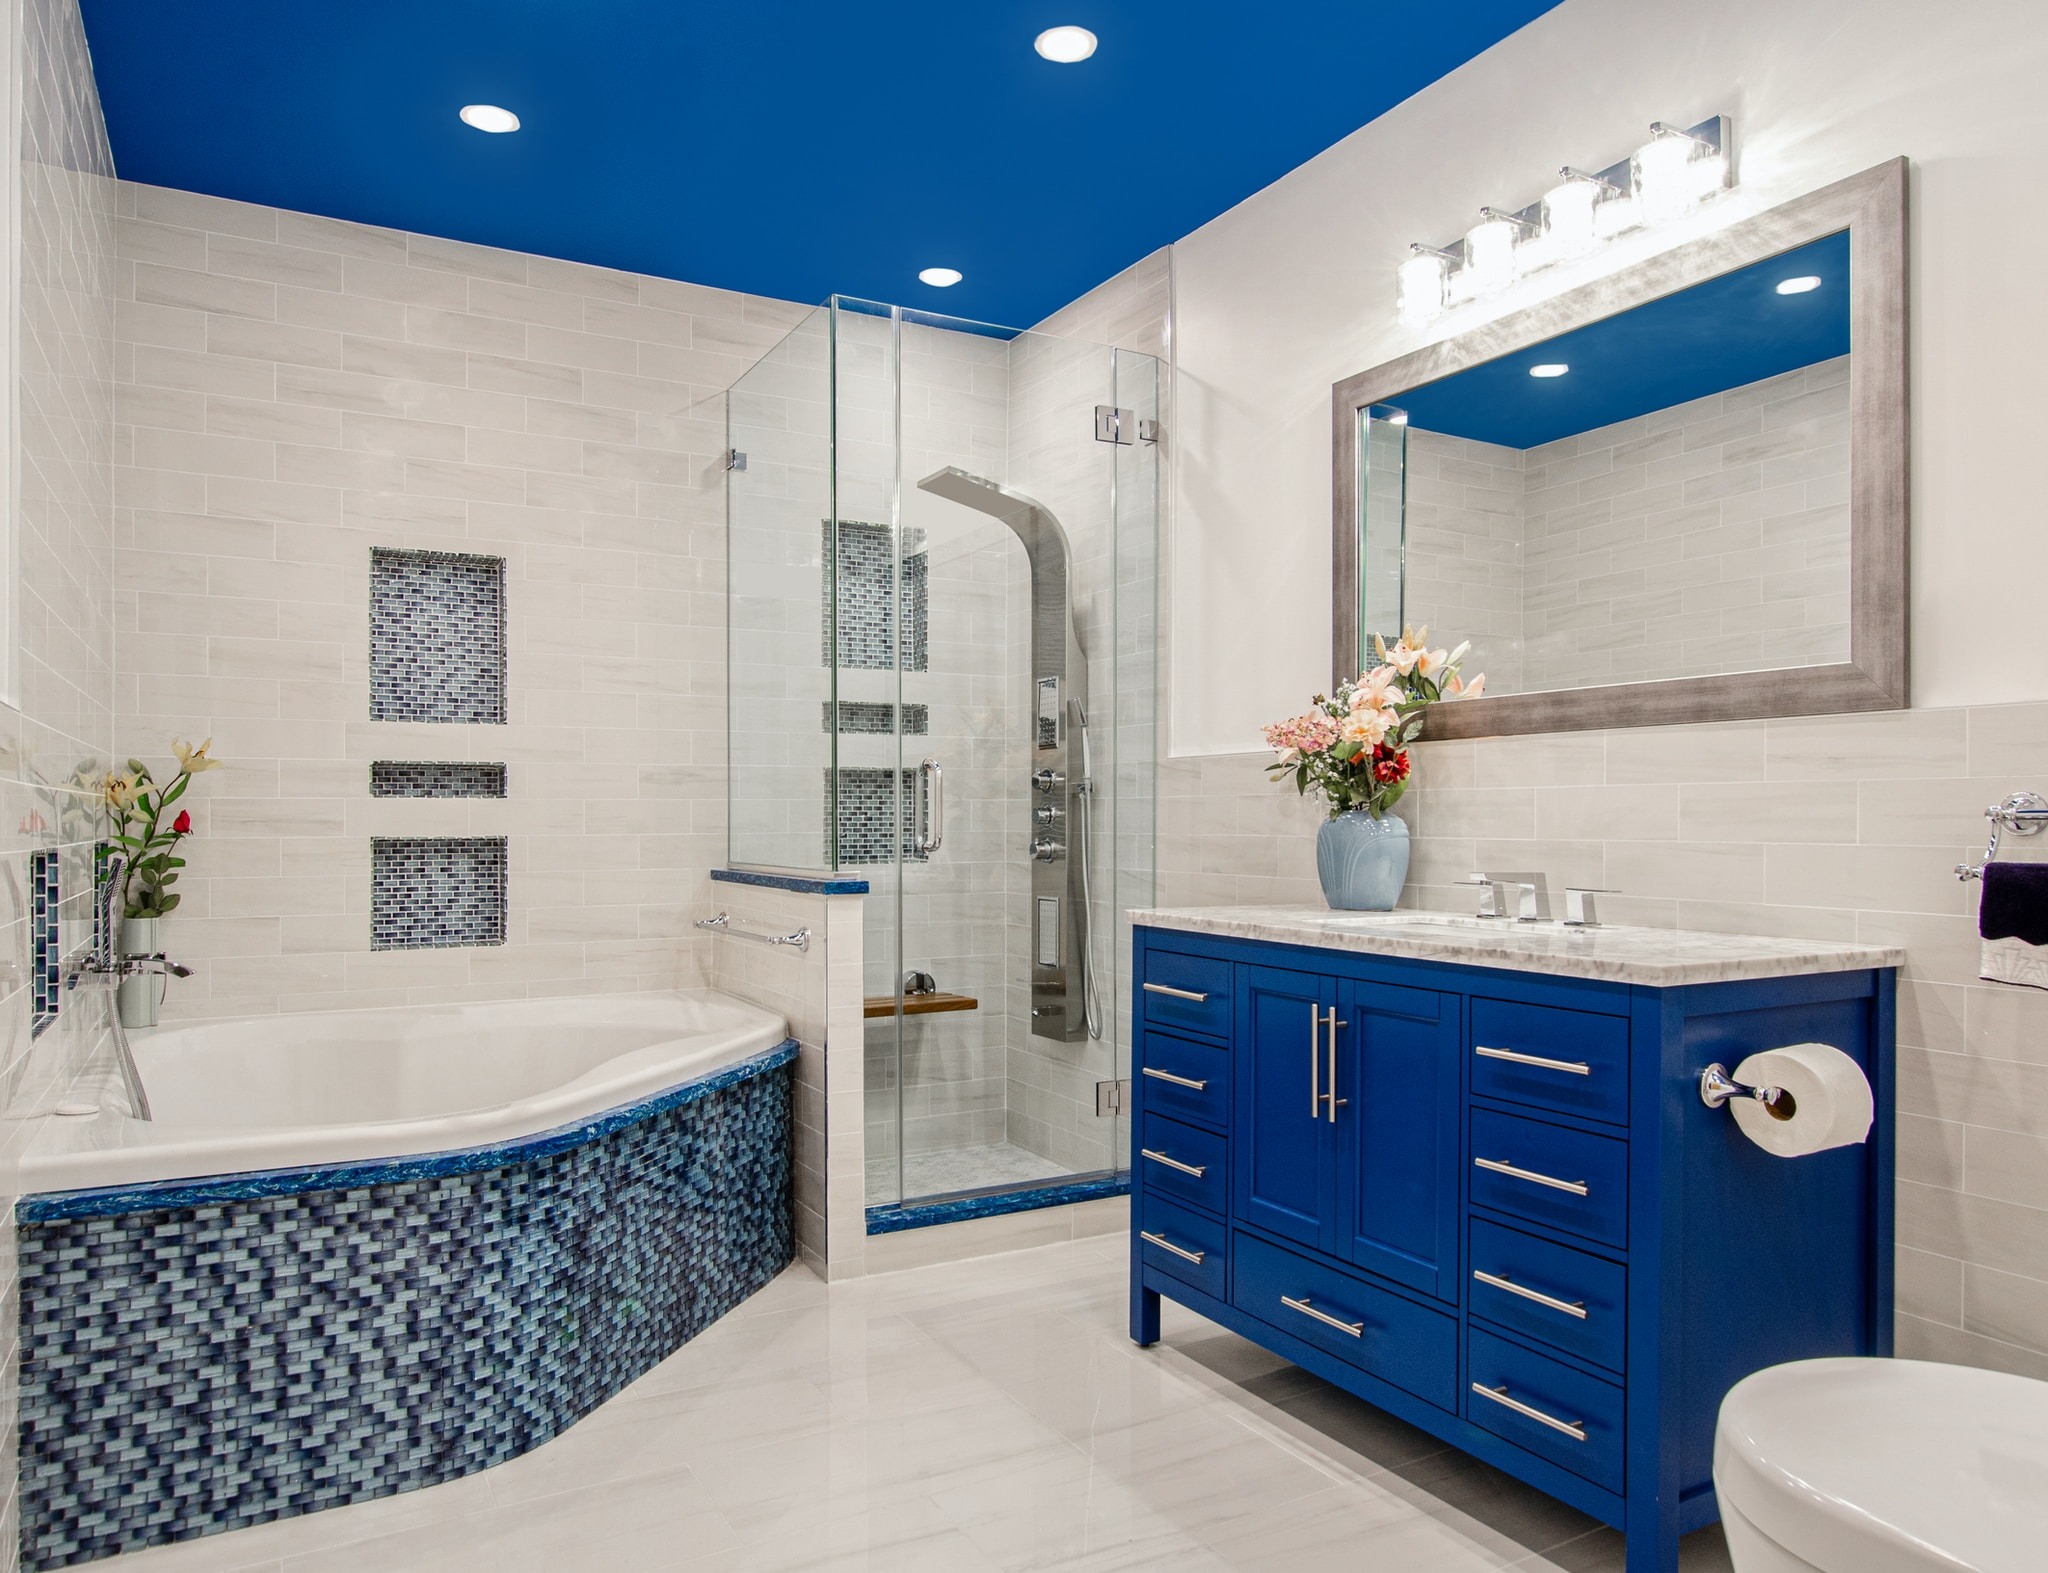 Top Colour and Design Accents To Incorporate in Your Bathroom